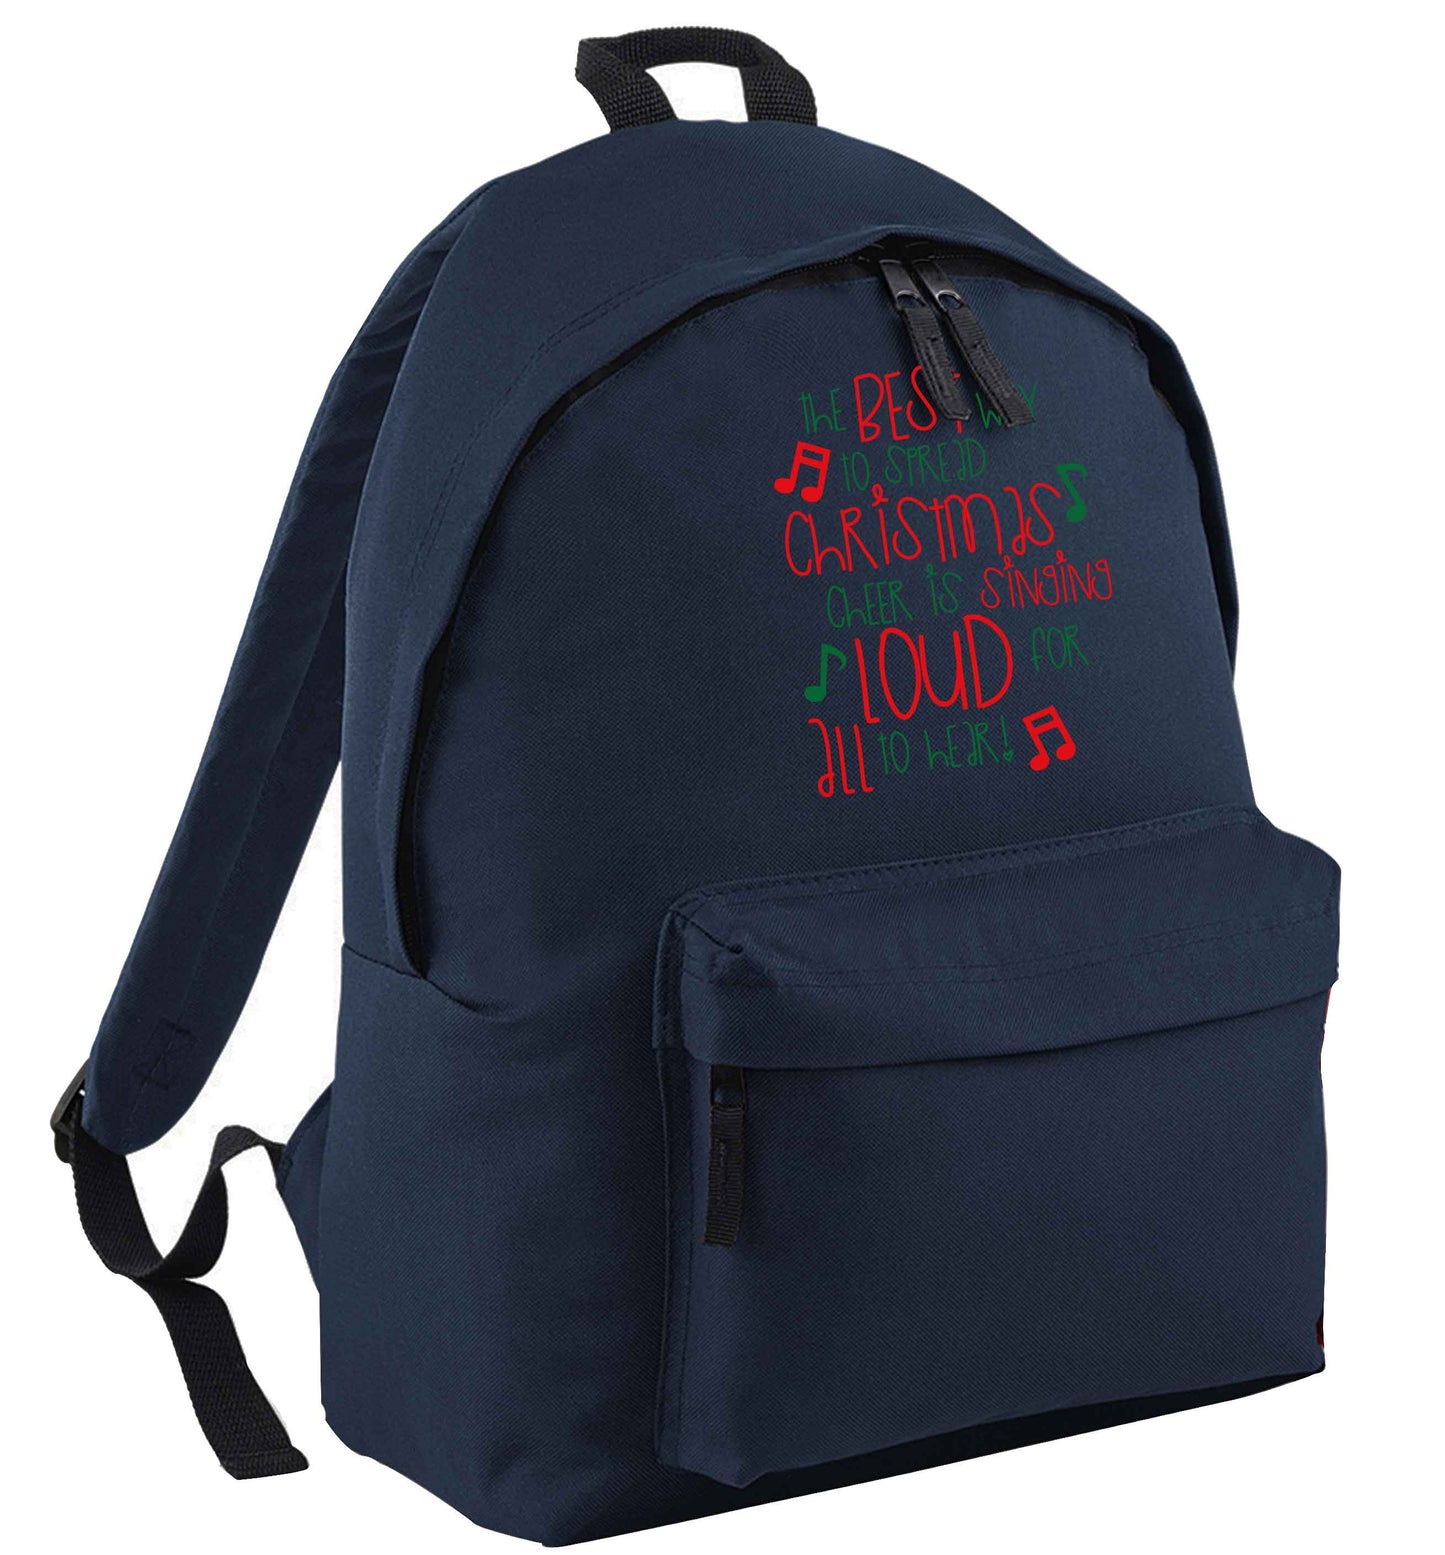 The best way to spread Christmas cheer is singing loud for all to hear navy adults backpack